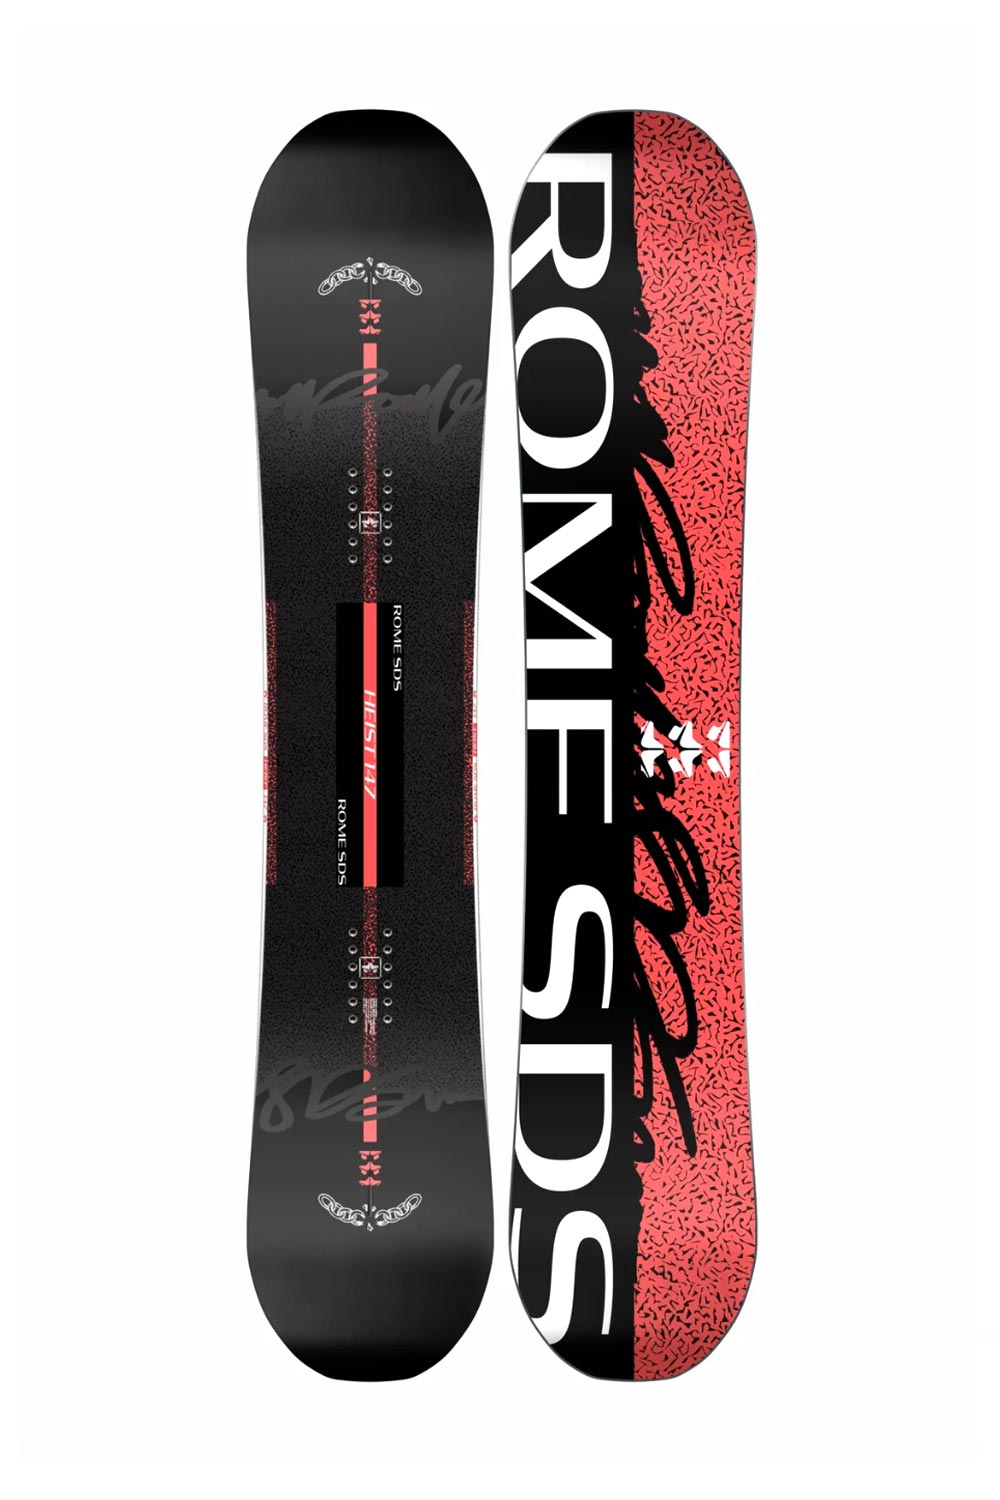 Women's Rome Heist snowboard, black with red/white accents